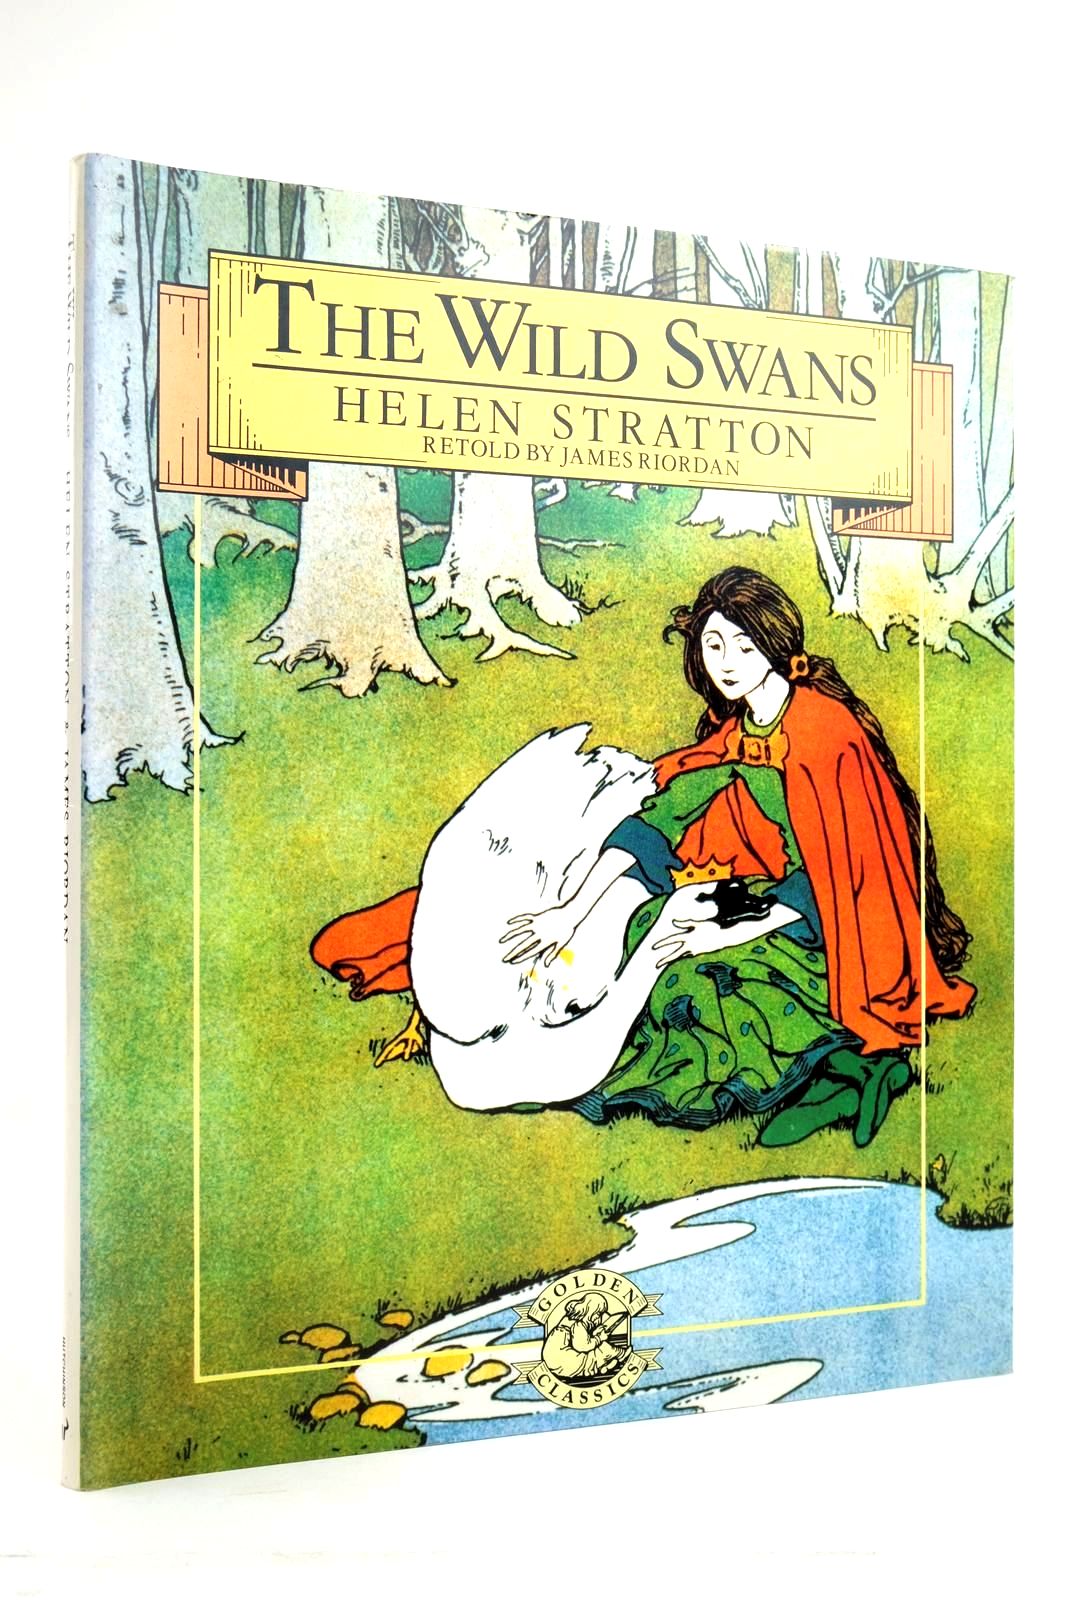 Photo of THE WILD SWANS written by Riordan, James illustrated by Stratton, Helen published by Hutchinson Children's Books (STOCK CODE: 2135545)  for sale by Stella & Rose's Books